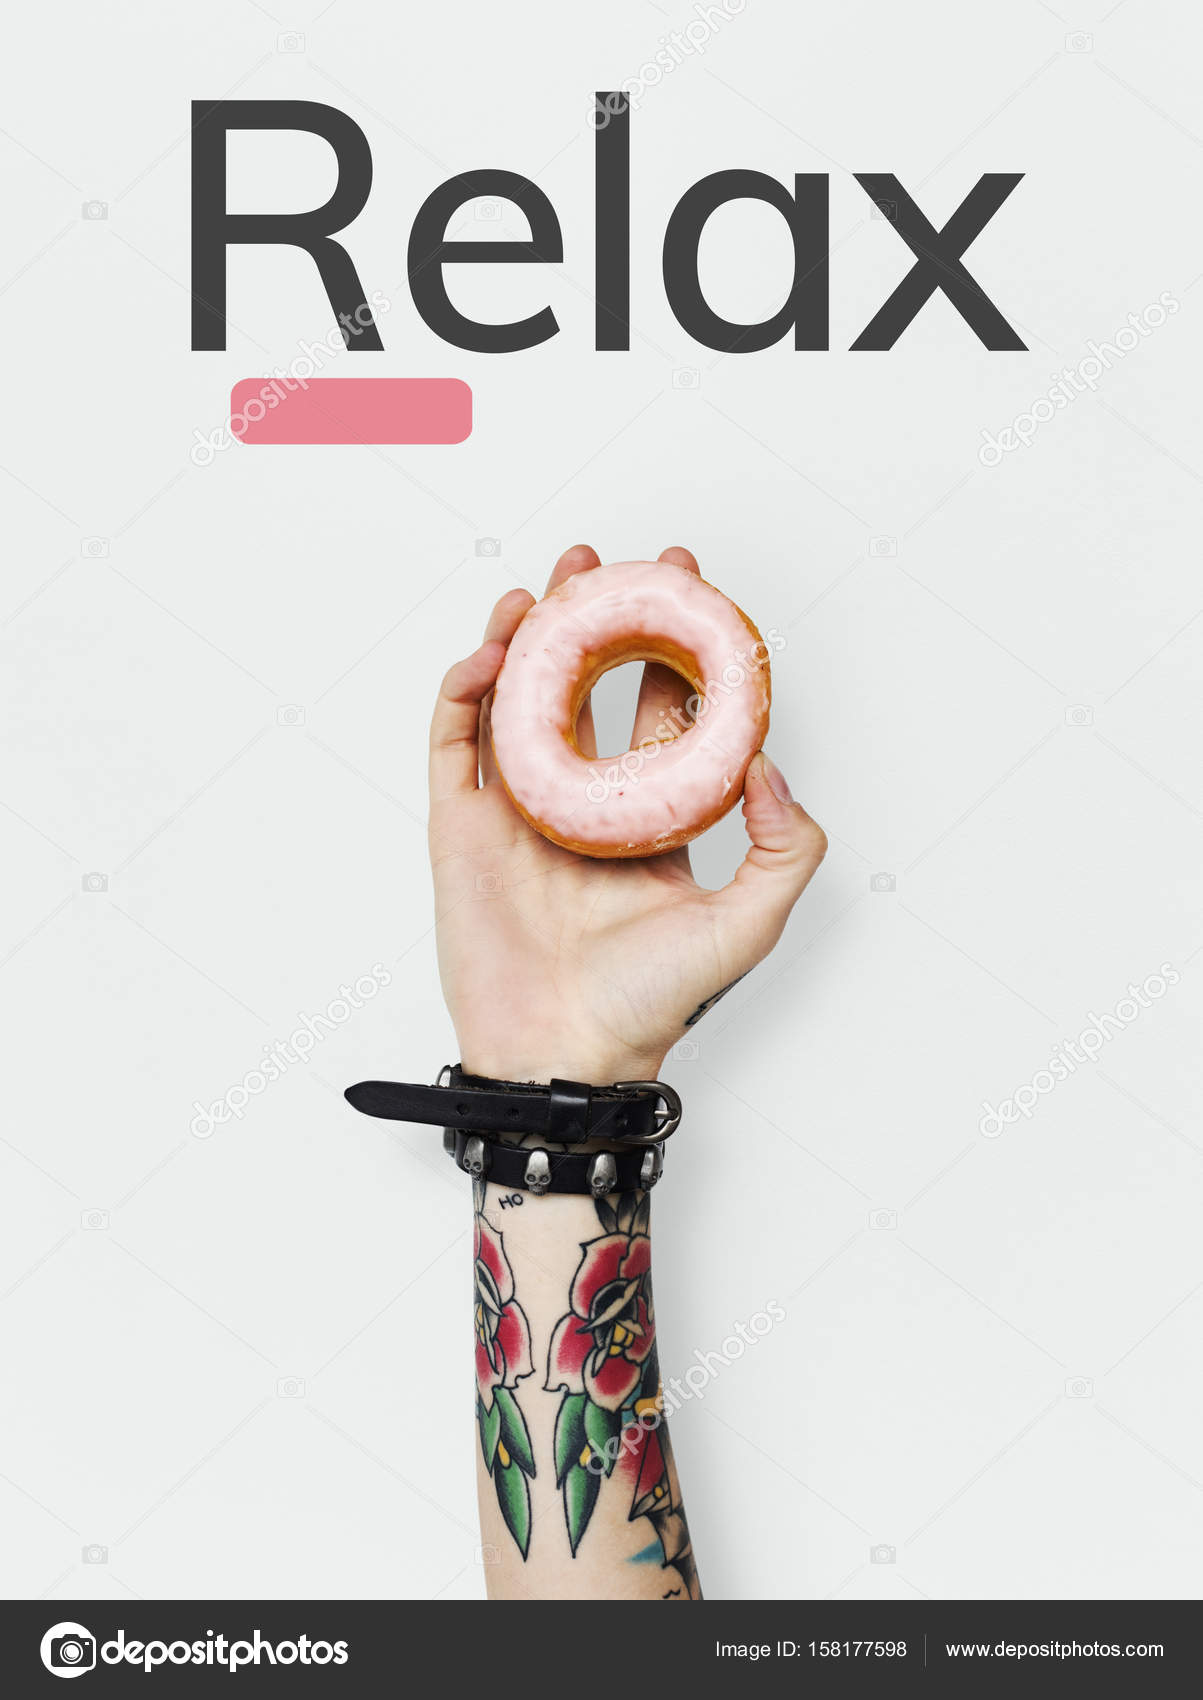 Tattooed person holding donut — Stock Photo © Rawpixel #158177598